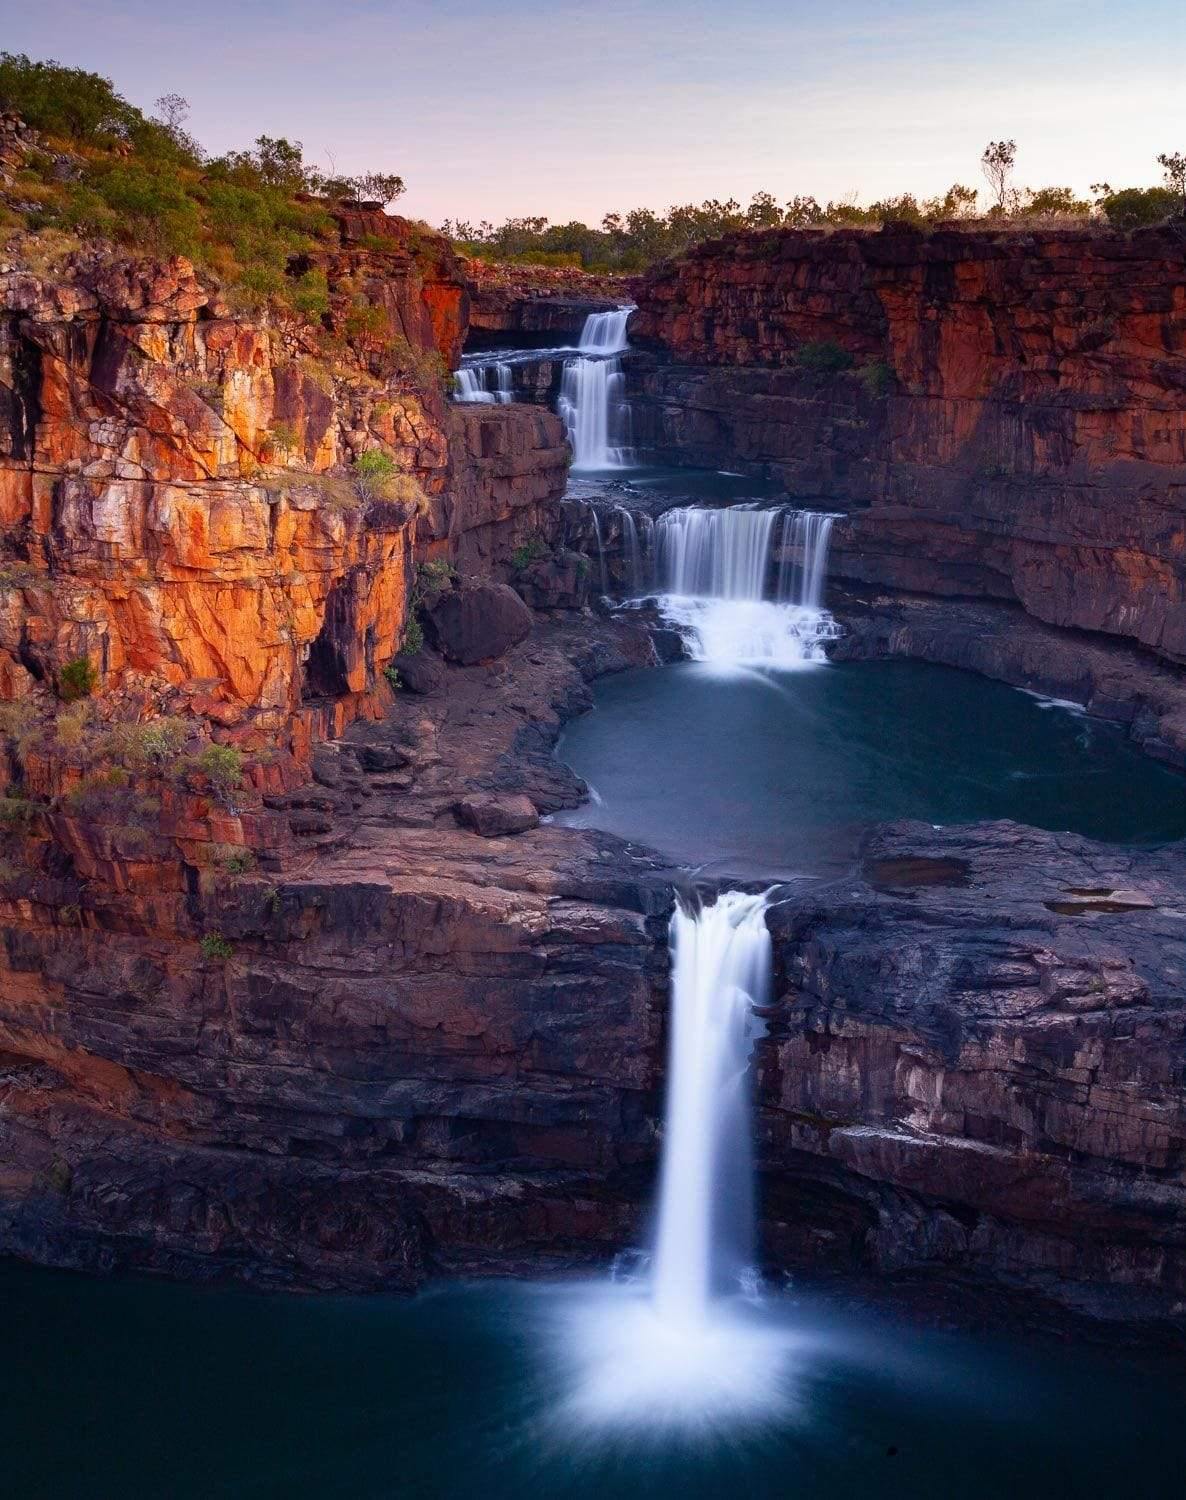 Nested waterfalls from a mountain and from a lake, Mitchell Falls at Dusk, The Kimberley, Western Australia